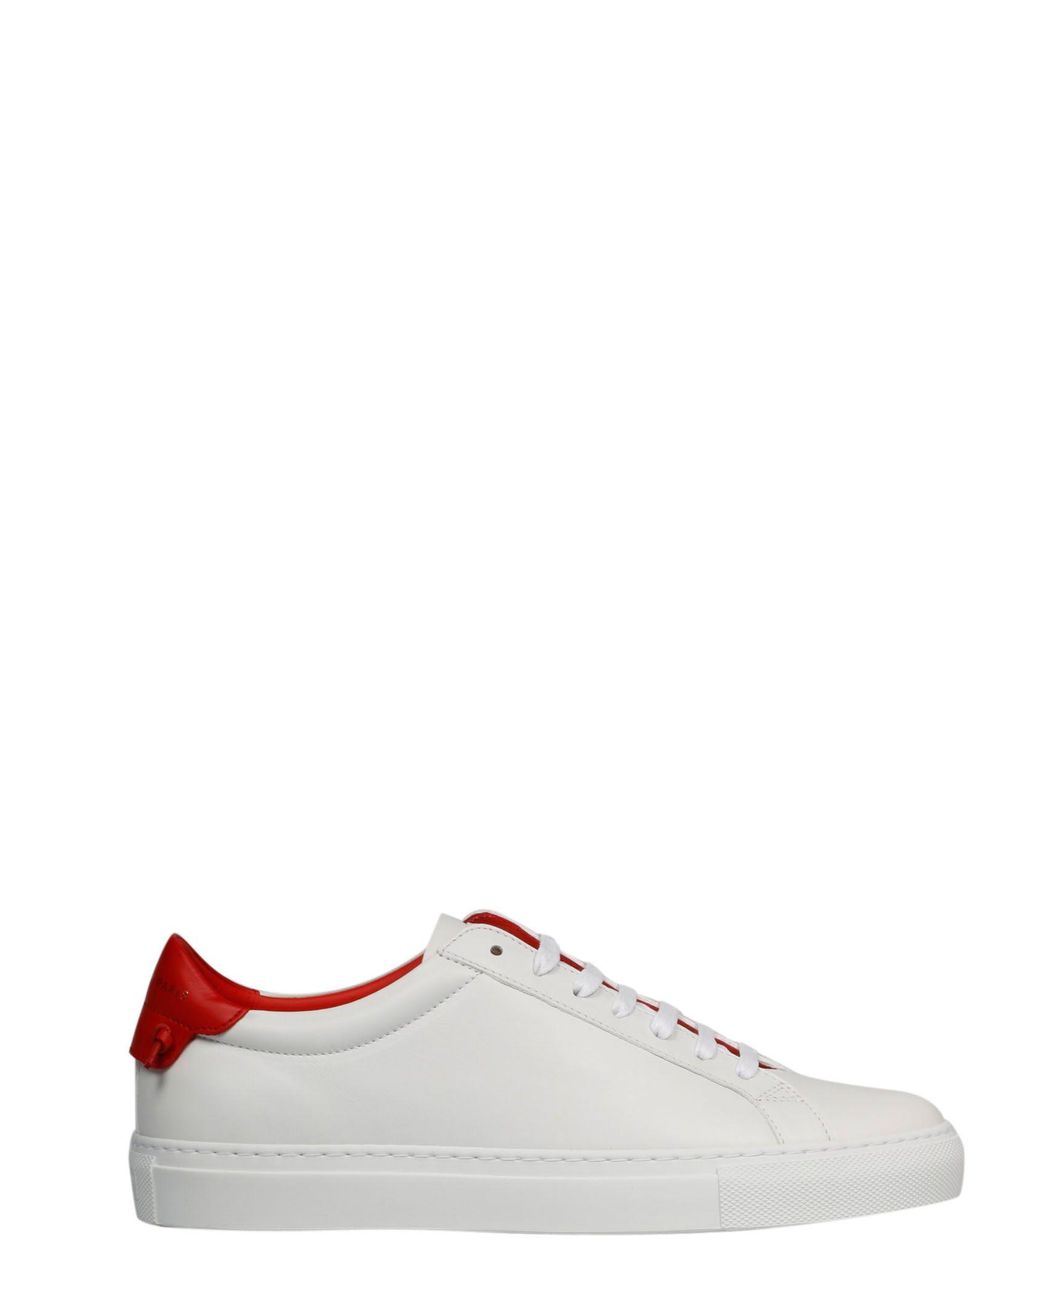 Givenchy White Leather Sneakers - Lyst